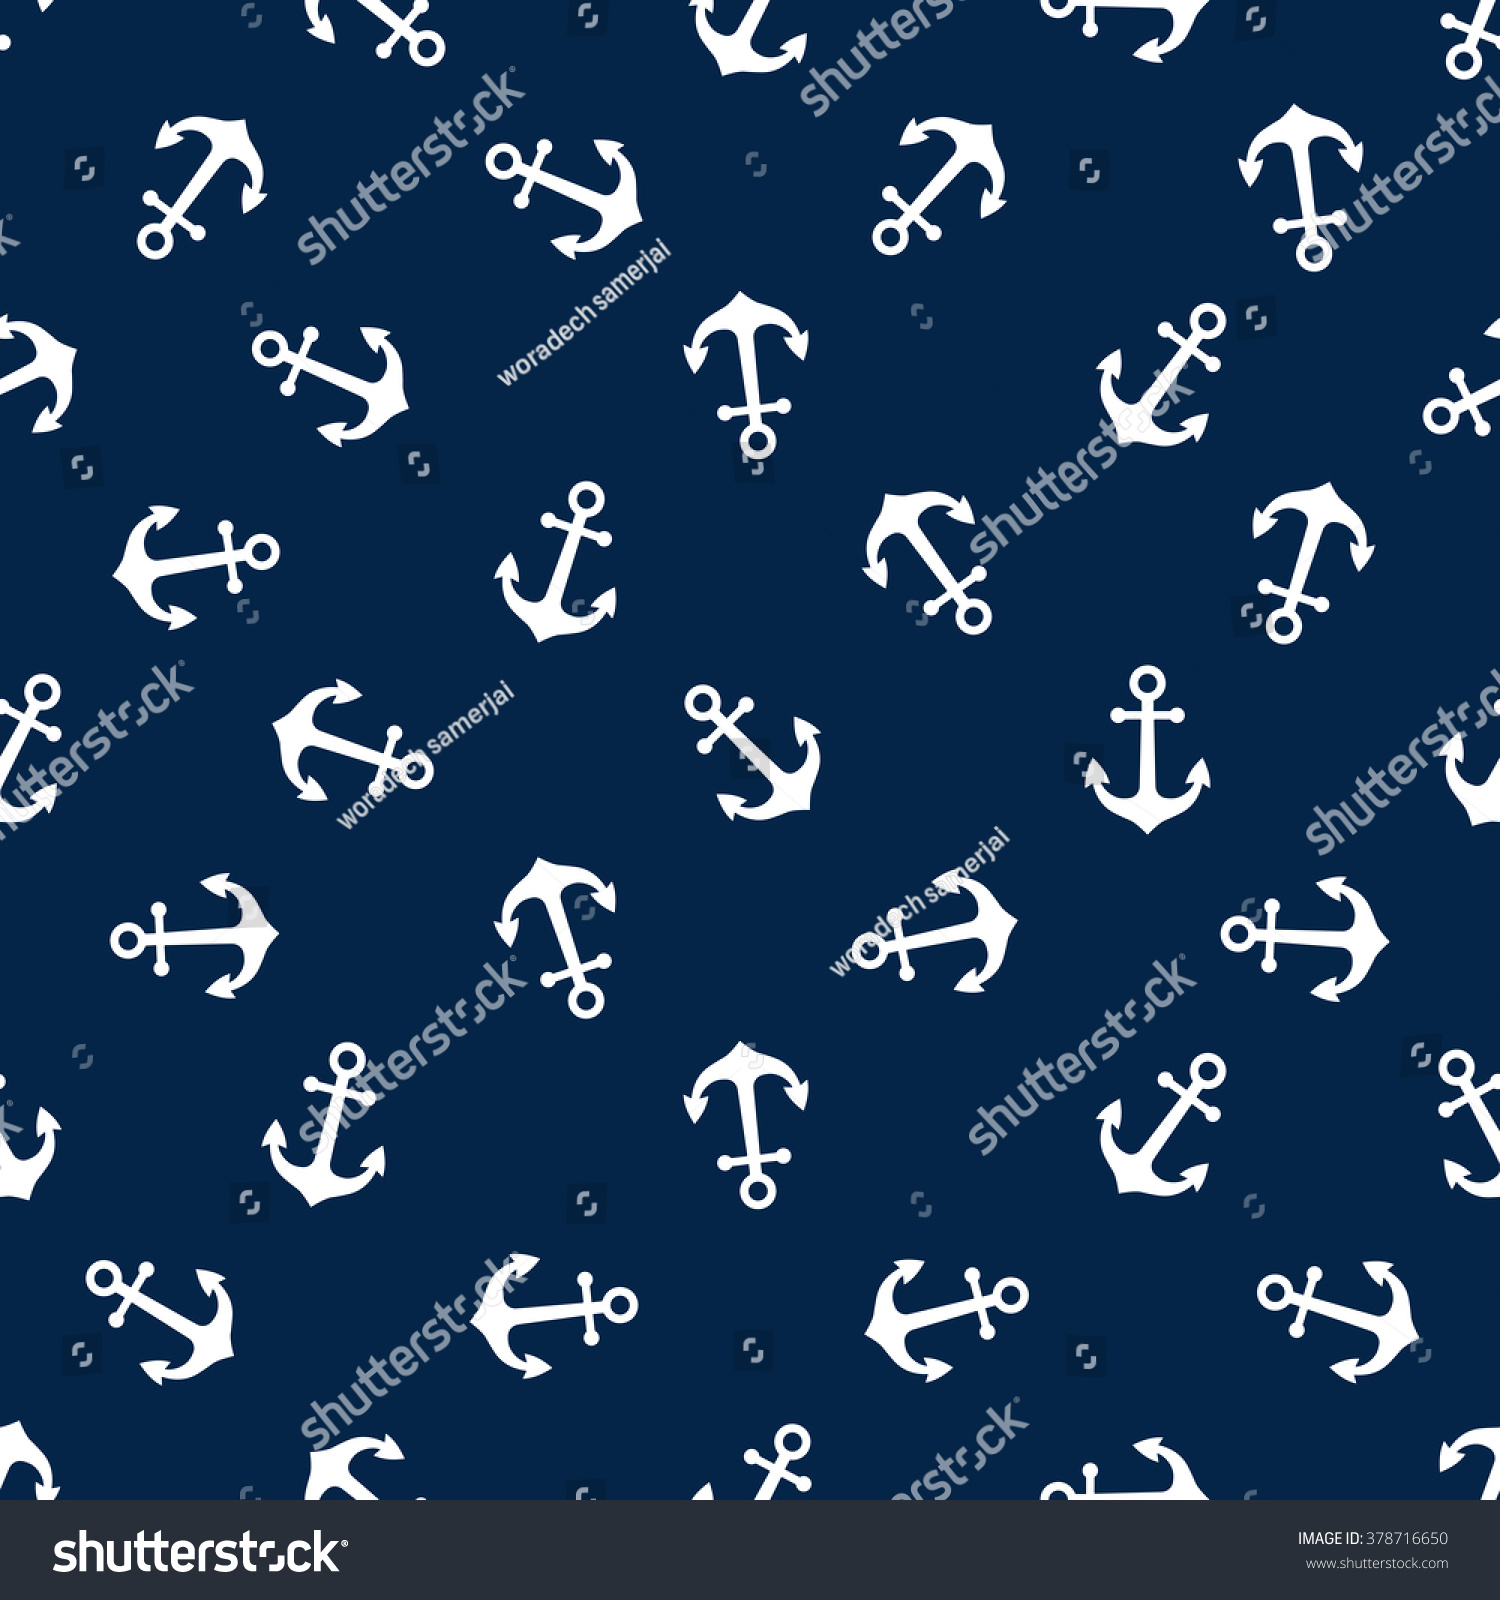 SVG of Seamless vector pattern with anchors. Seamless pattern can be used for wallpaper, pattern fills, web page background, surface textures. svg